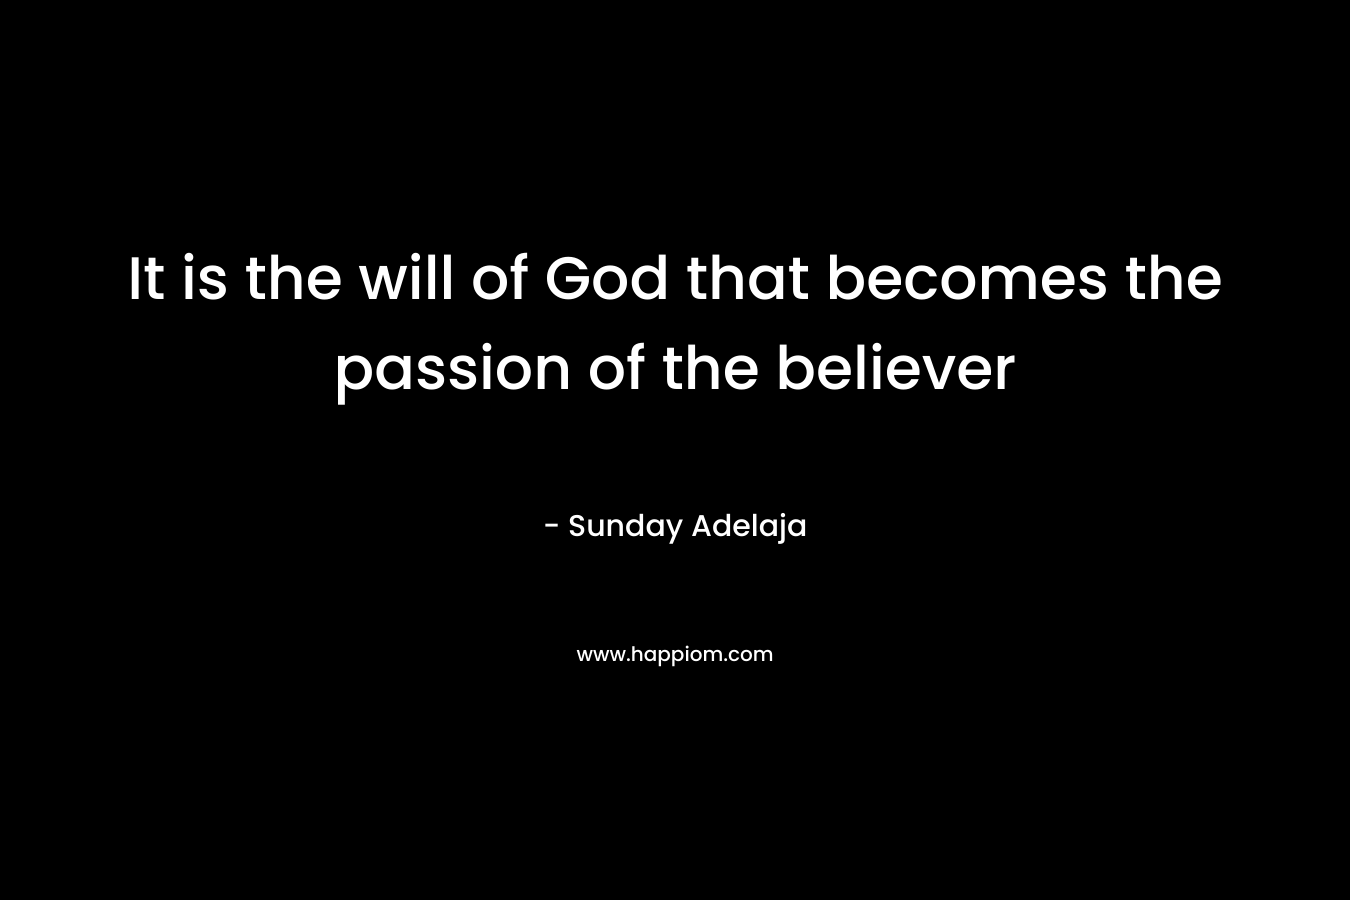 It is the will of God that becomes the passion of the believer